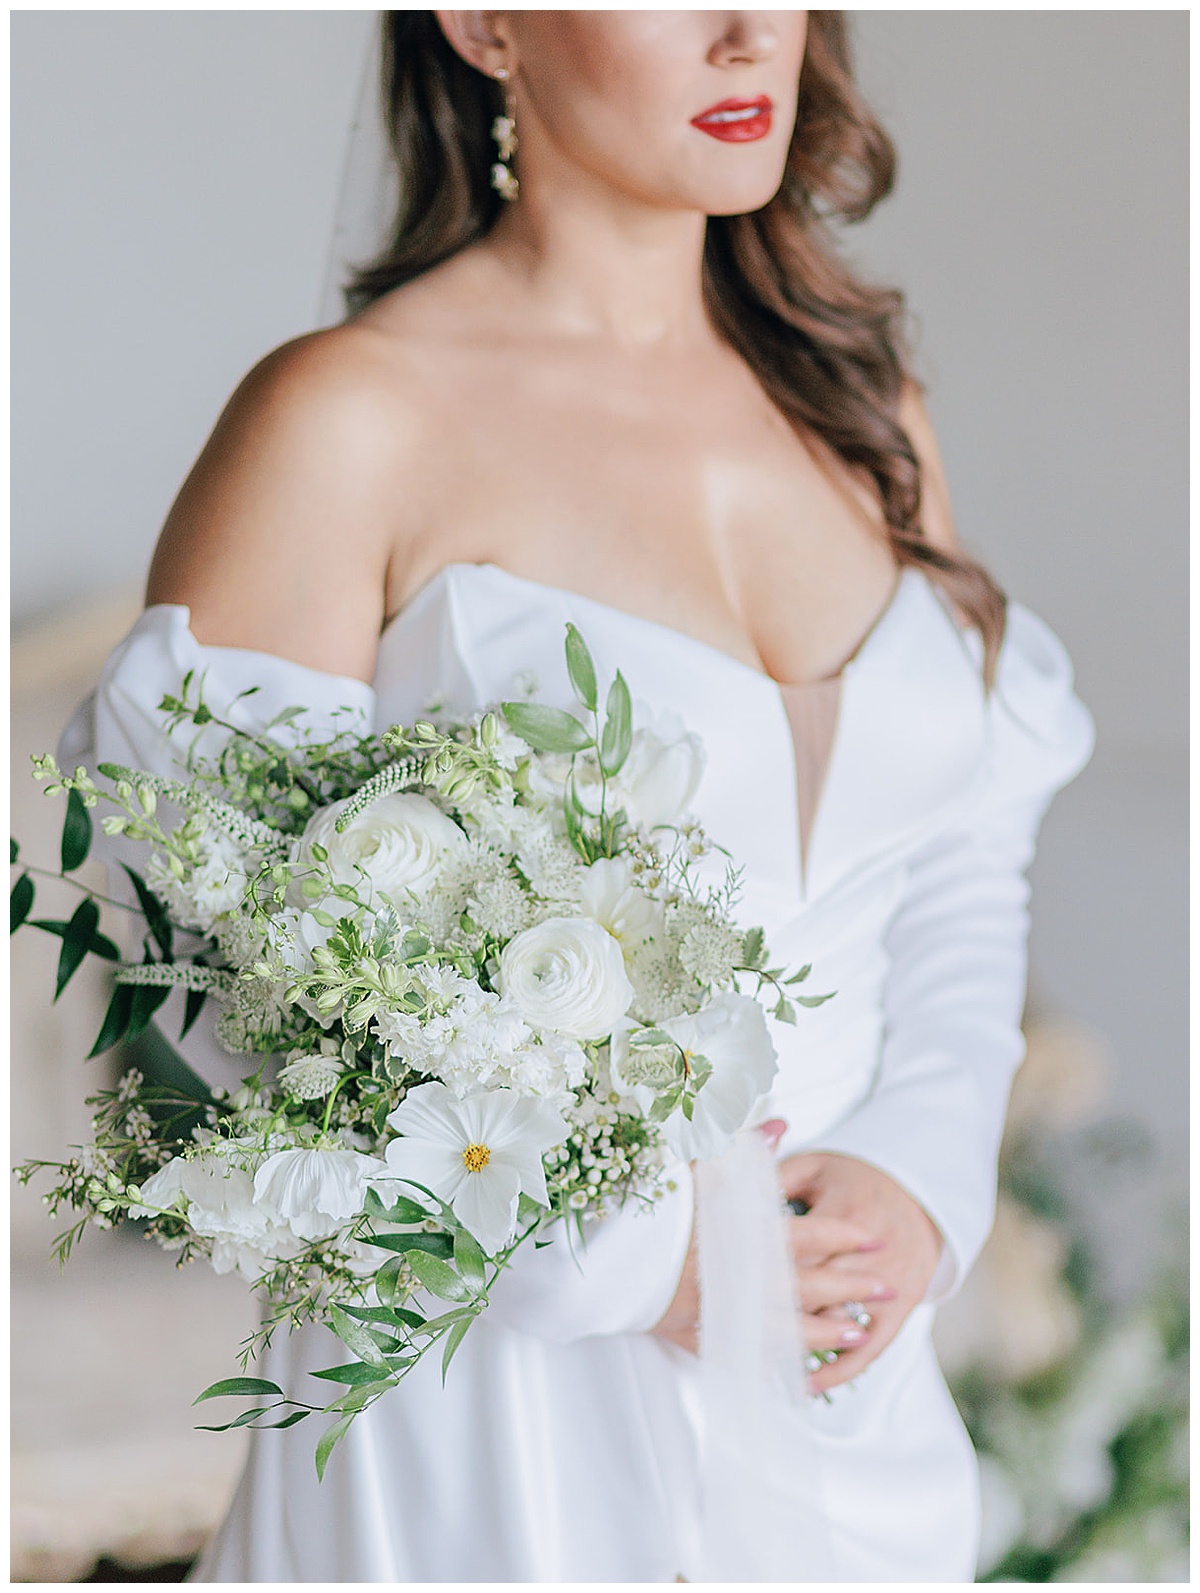 Stunning bride holds a gorgeous white bouquet during this War Memorial Editorial